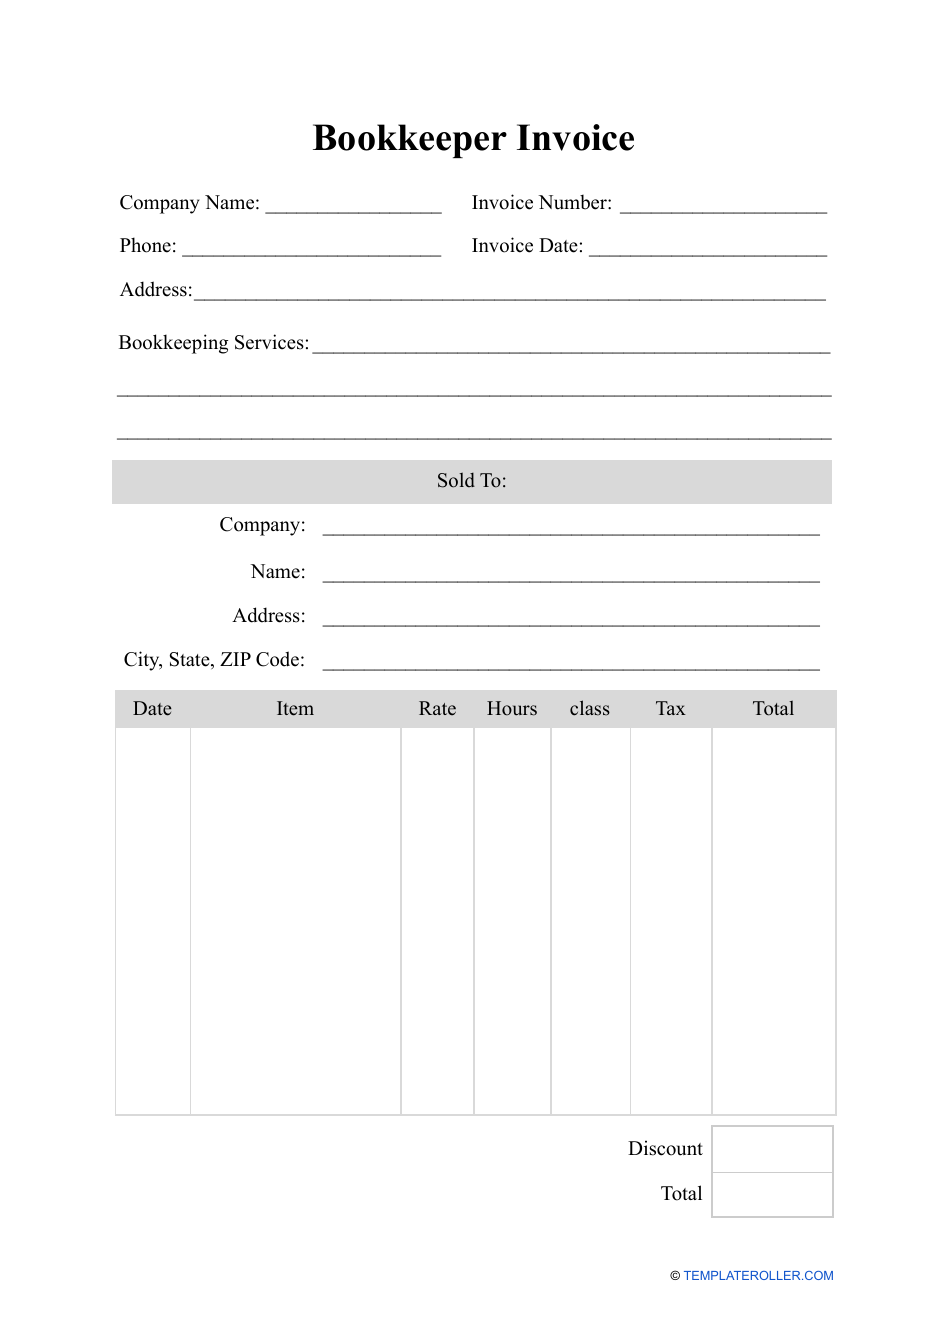 Bookkeeper Invoice Template Fill Out Sign Online and Download PDF